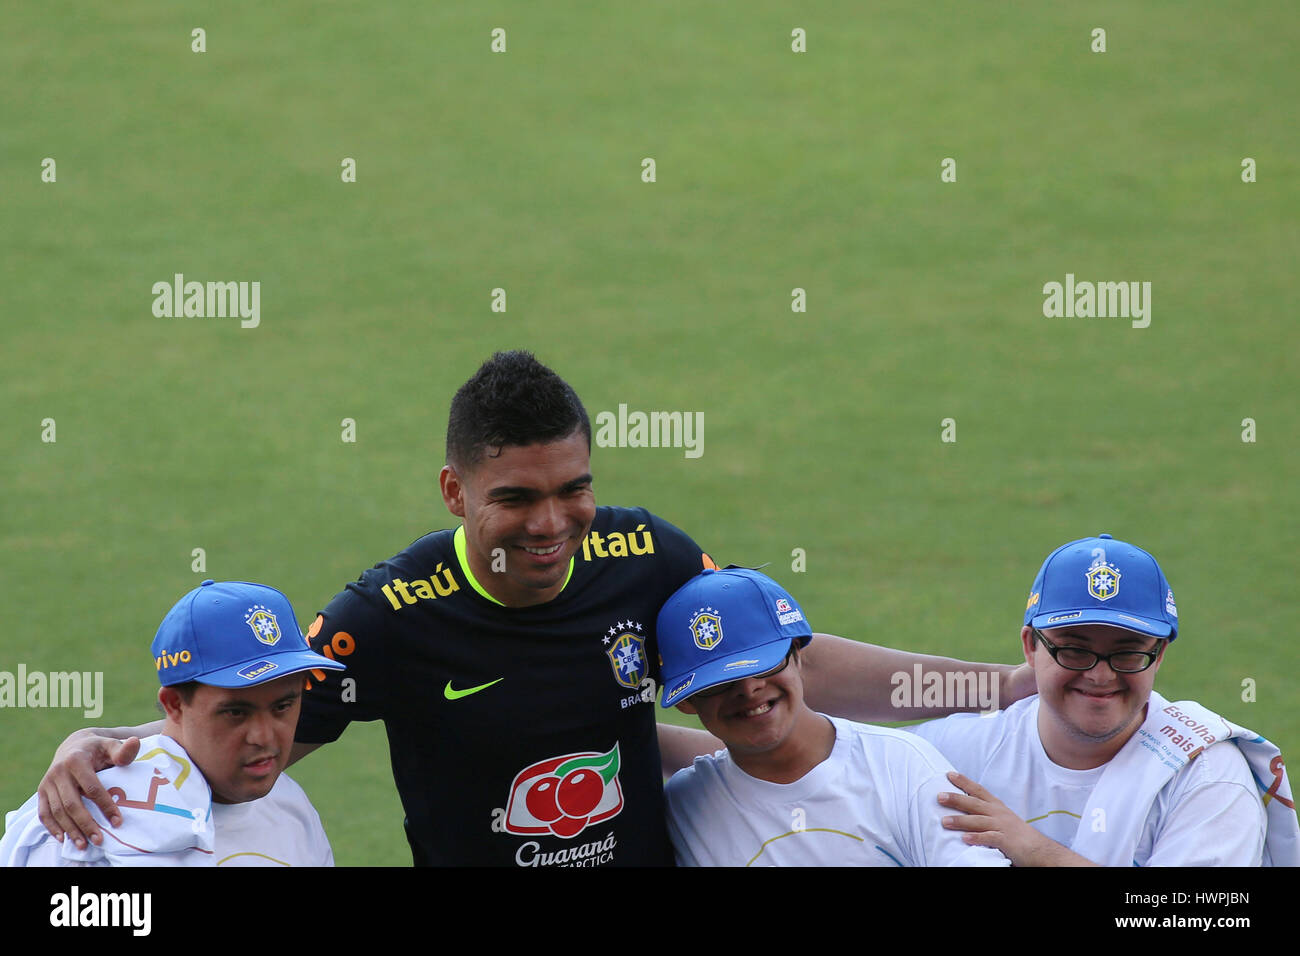 Sao Paulo, Brazil. 21st Mar, 2017. Player Casemiro (2nd-L), of the Brazilian national soccer team, poses along kids with Down Syndrome, in the context of the World Down Syndrome Day, during a training session in Sao Paulo, Brazil, on March 21, 2017. Brazil will play against Urugay on March 23 in Montevideo, and against Paraguay on March 28 in Sao Paulo, on Russia 2018 World Cup play-off matches. Credit: Rahel Patrasso/Xinhua/Alamy Live News Stock Photo